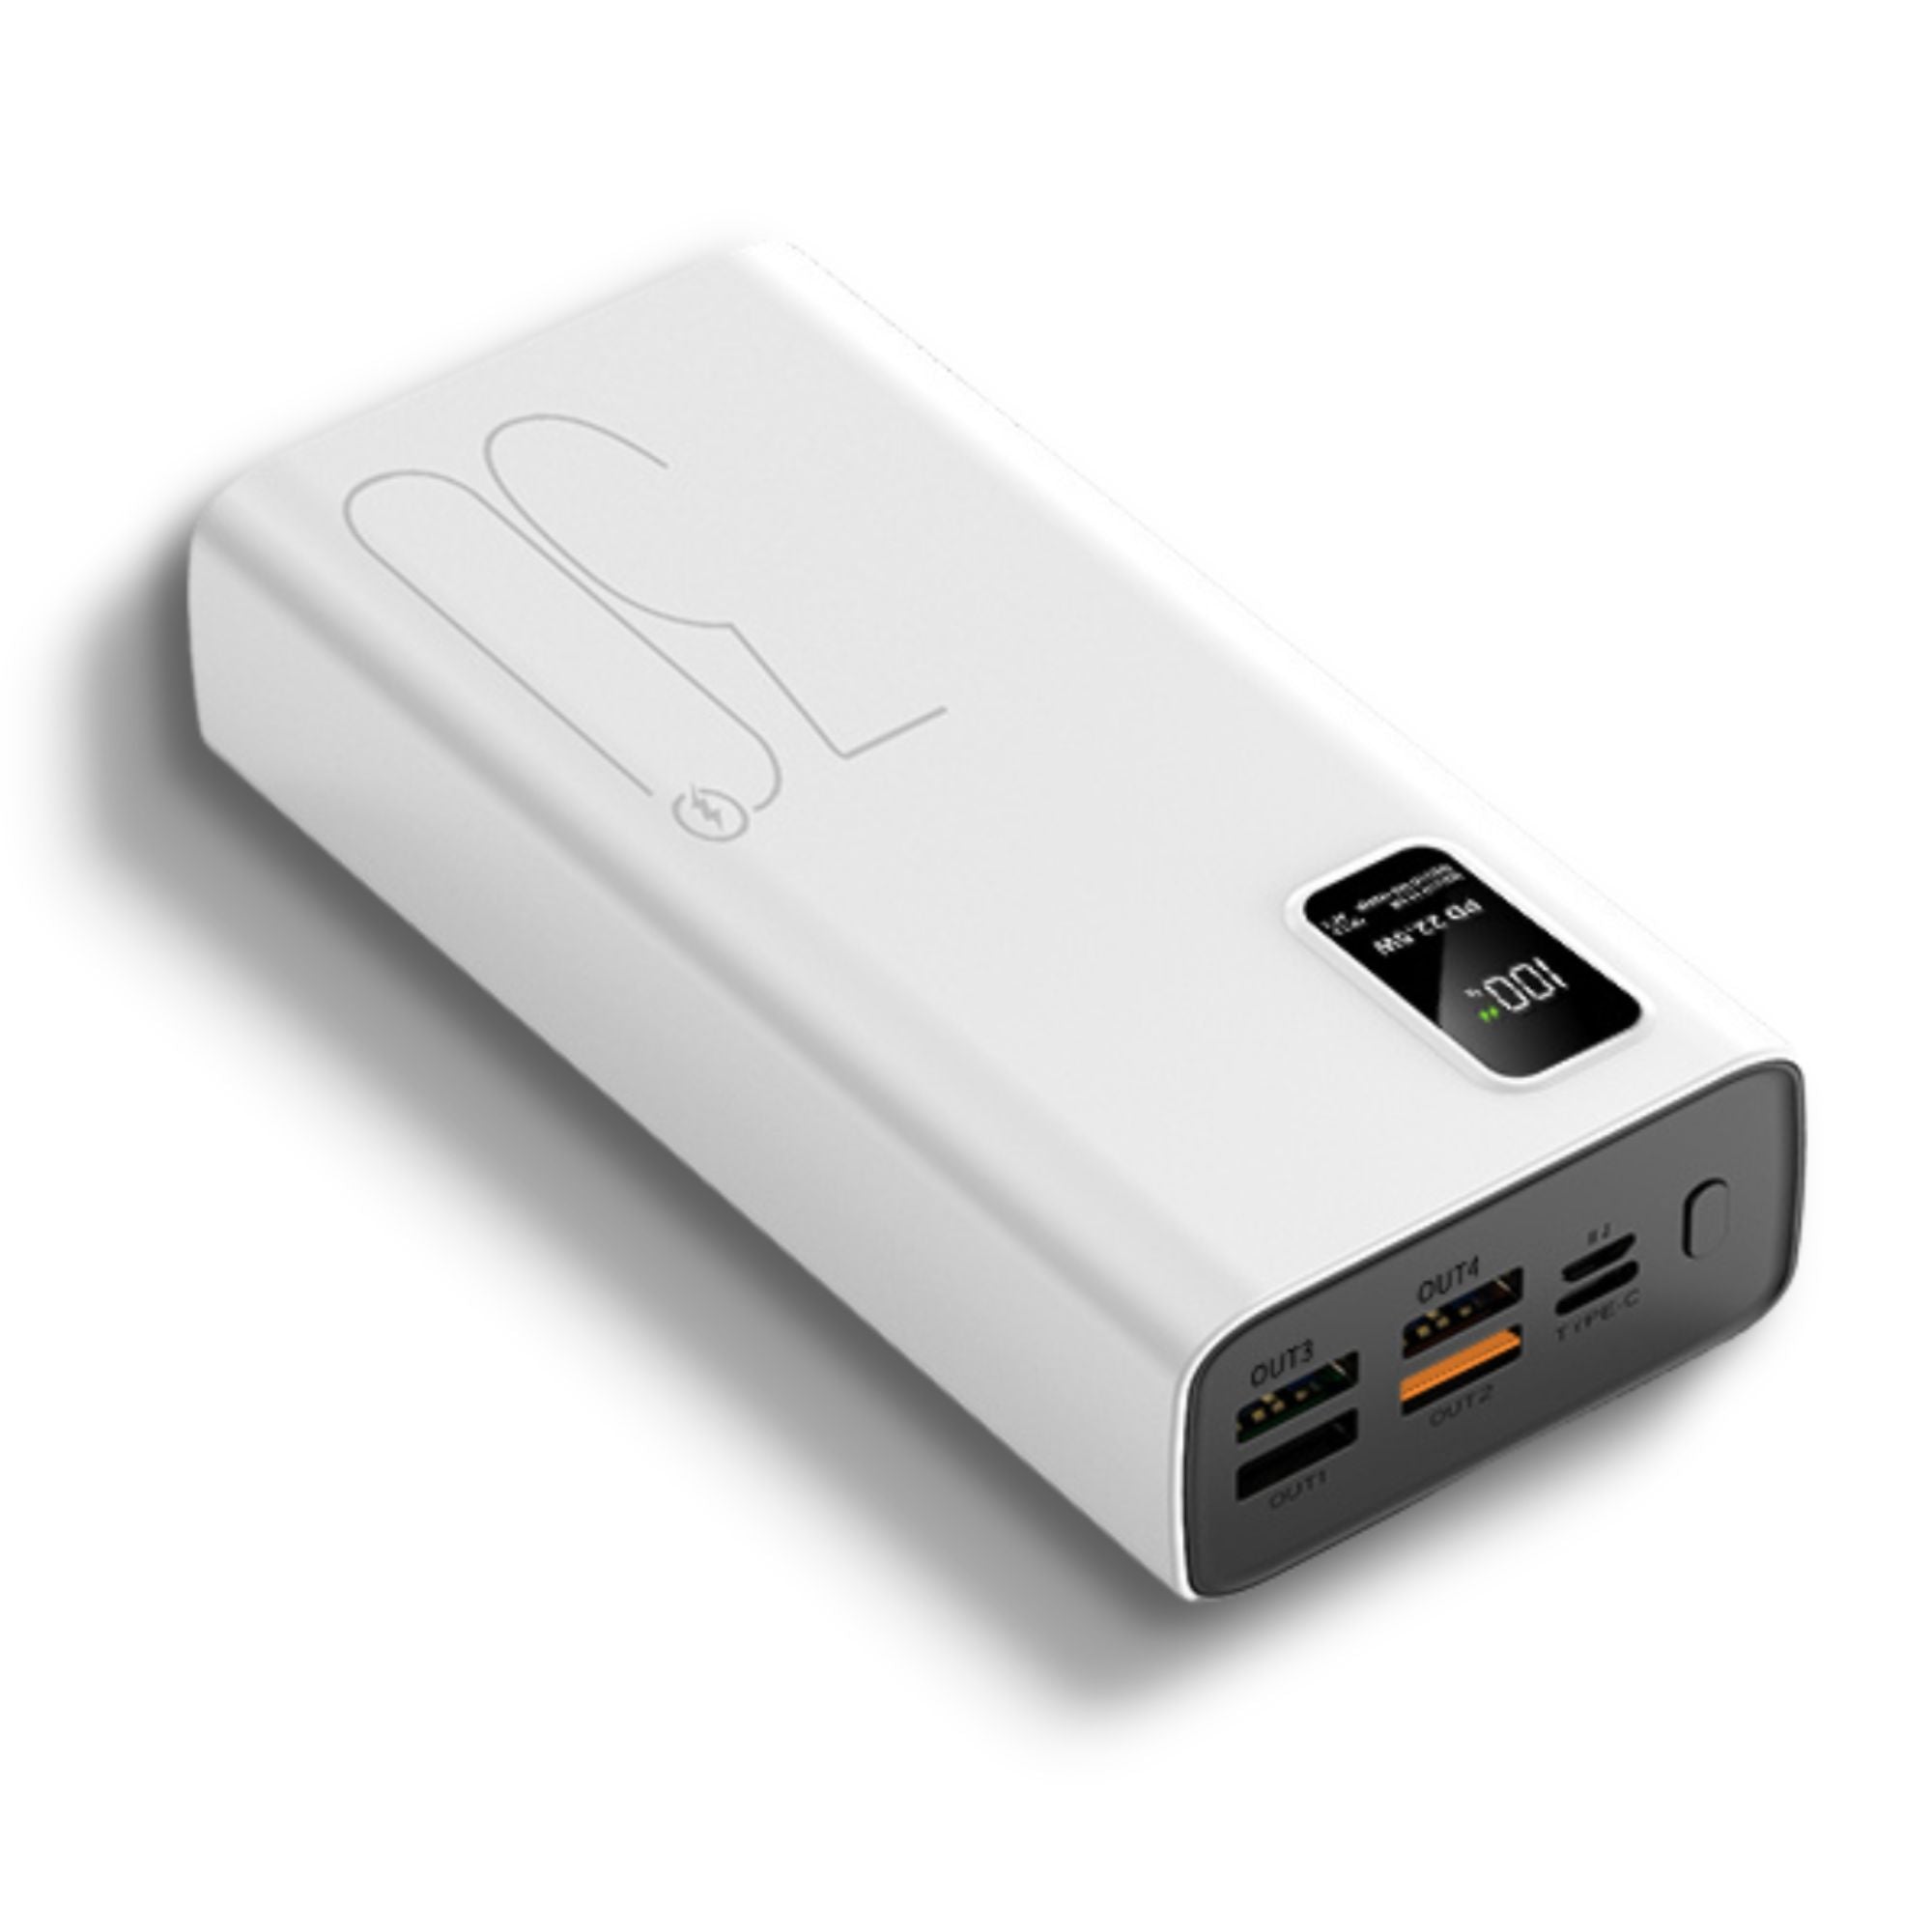 30000mAh PD 22.5W Power Bank Portable Charger with 4 USB Output Ports -  Targetgears